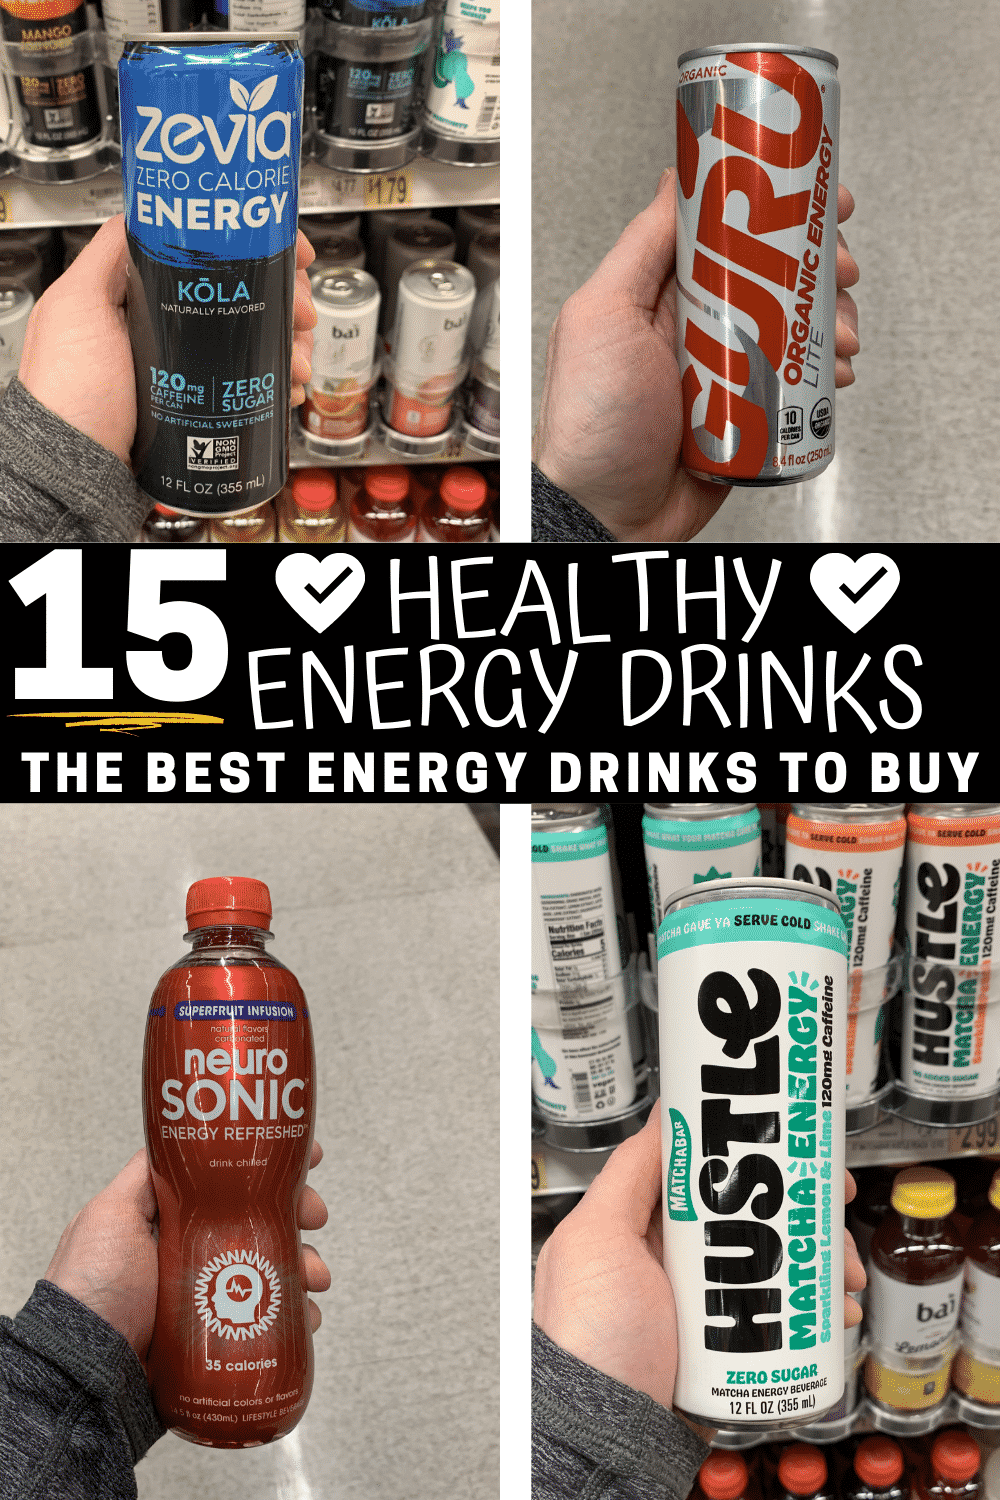 A compilation of 4 photos with a hand holding an energy drink, and text that reads "15 healthy energy drinks".